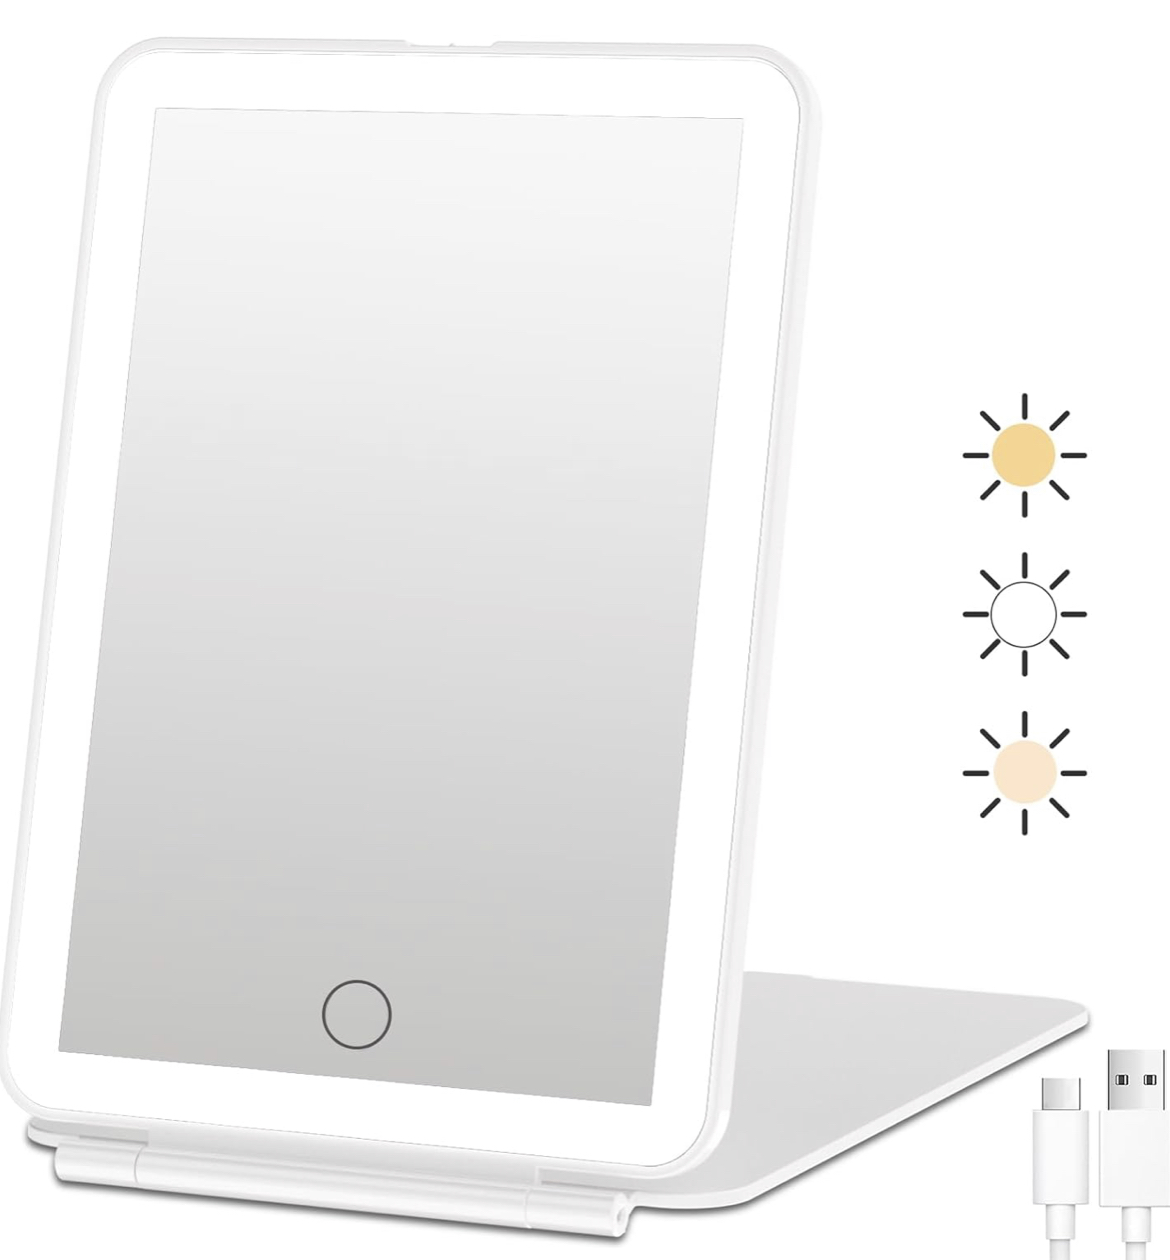 Portable lighted beauty mirror on amazon. Best friend gifts. Gift ideas for best friend. BFF gift ideas. Bestie gift ideas. Gift Ideas for a special friend. Gift ideas for sister. Gift ideas for female best friends. Presents for best friend. Unique best friend gifts. Meaningful gift ideas. Thoughtful presents